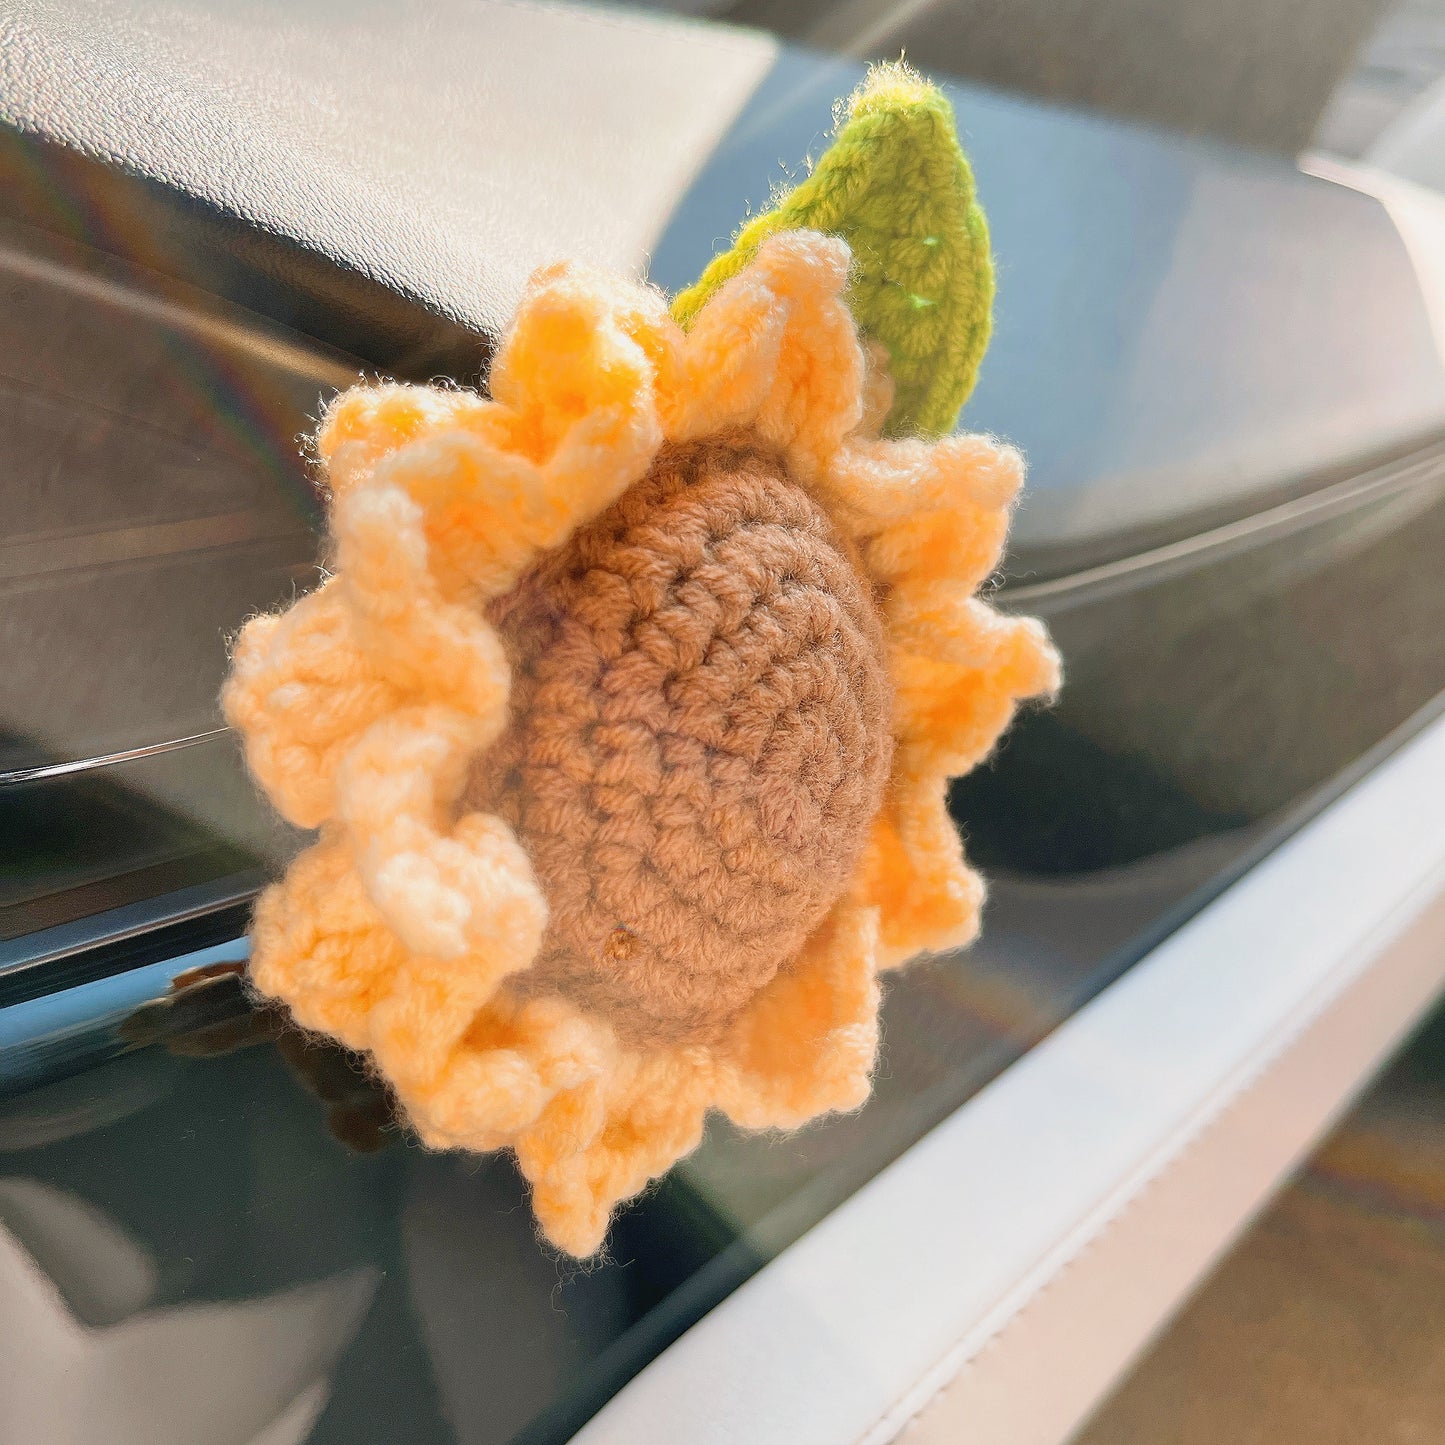 Handmade Crocheted Floral Car Air Fresheners: Christmas, Birthday, Any Occasion